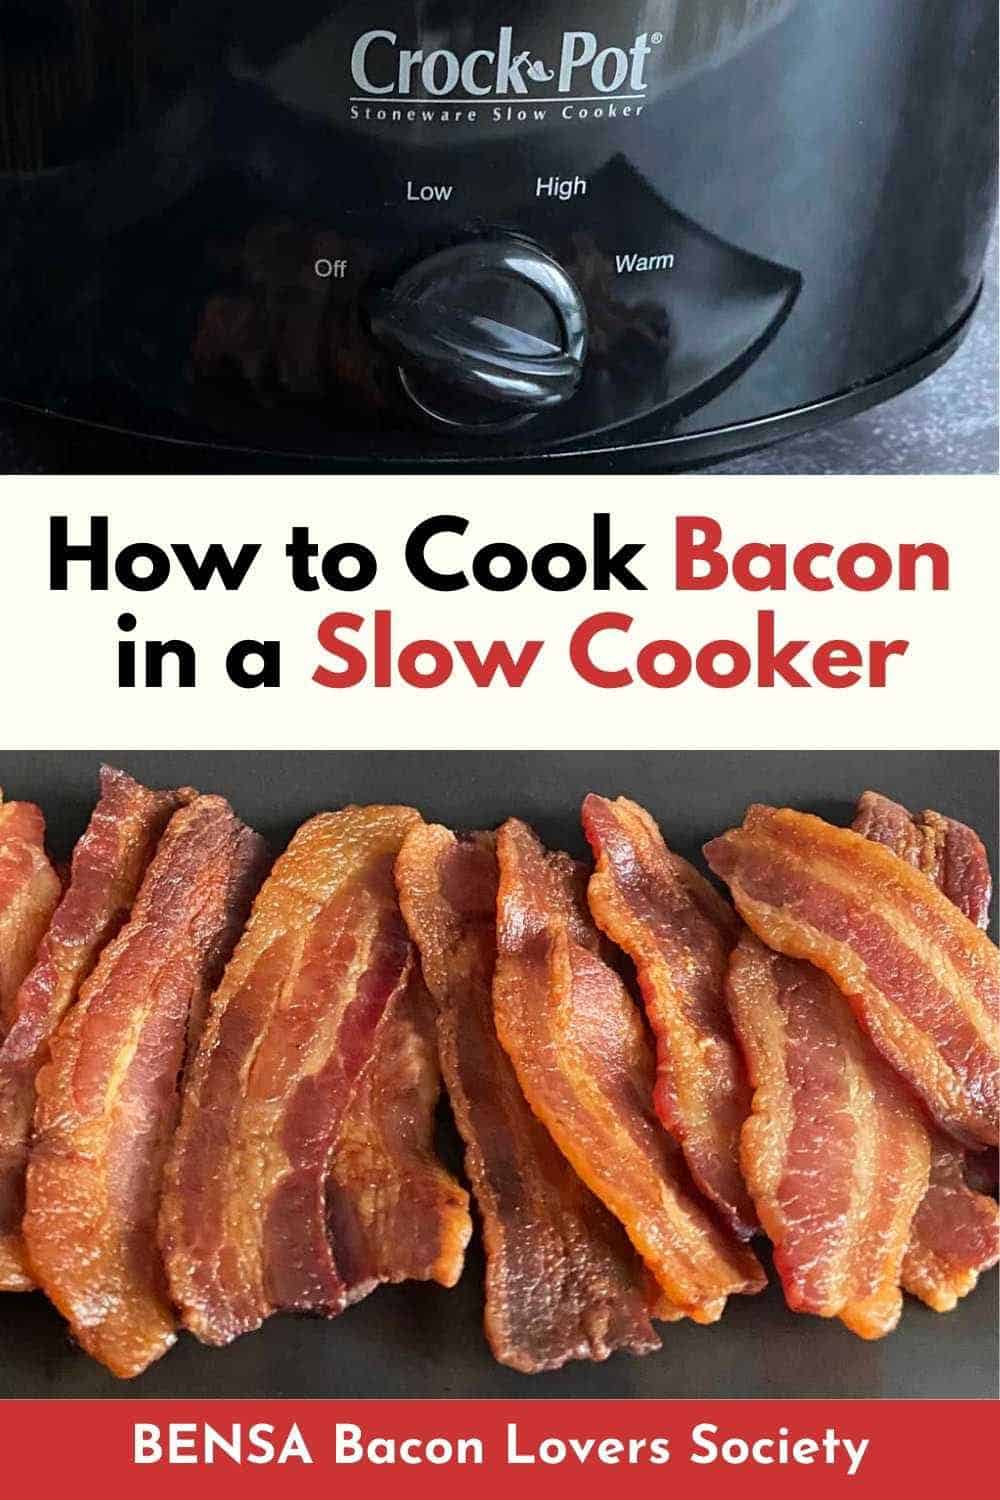 A black crock pot and a pile of just-cooked bacon on a black tray with text "How to Cook Bacon in a Slow Cooker."